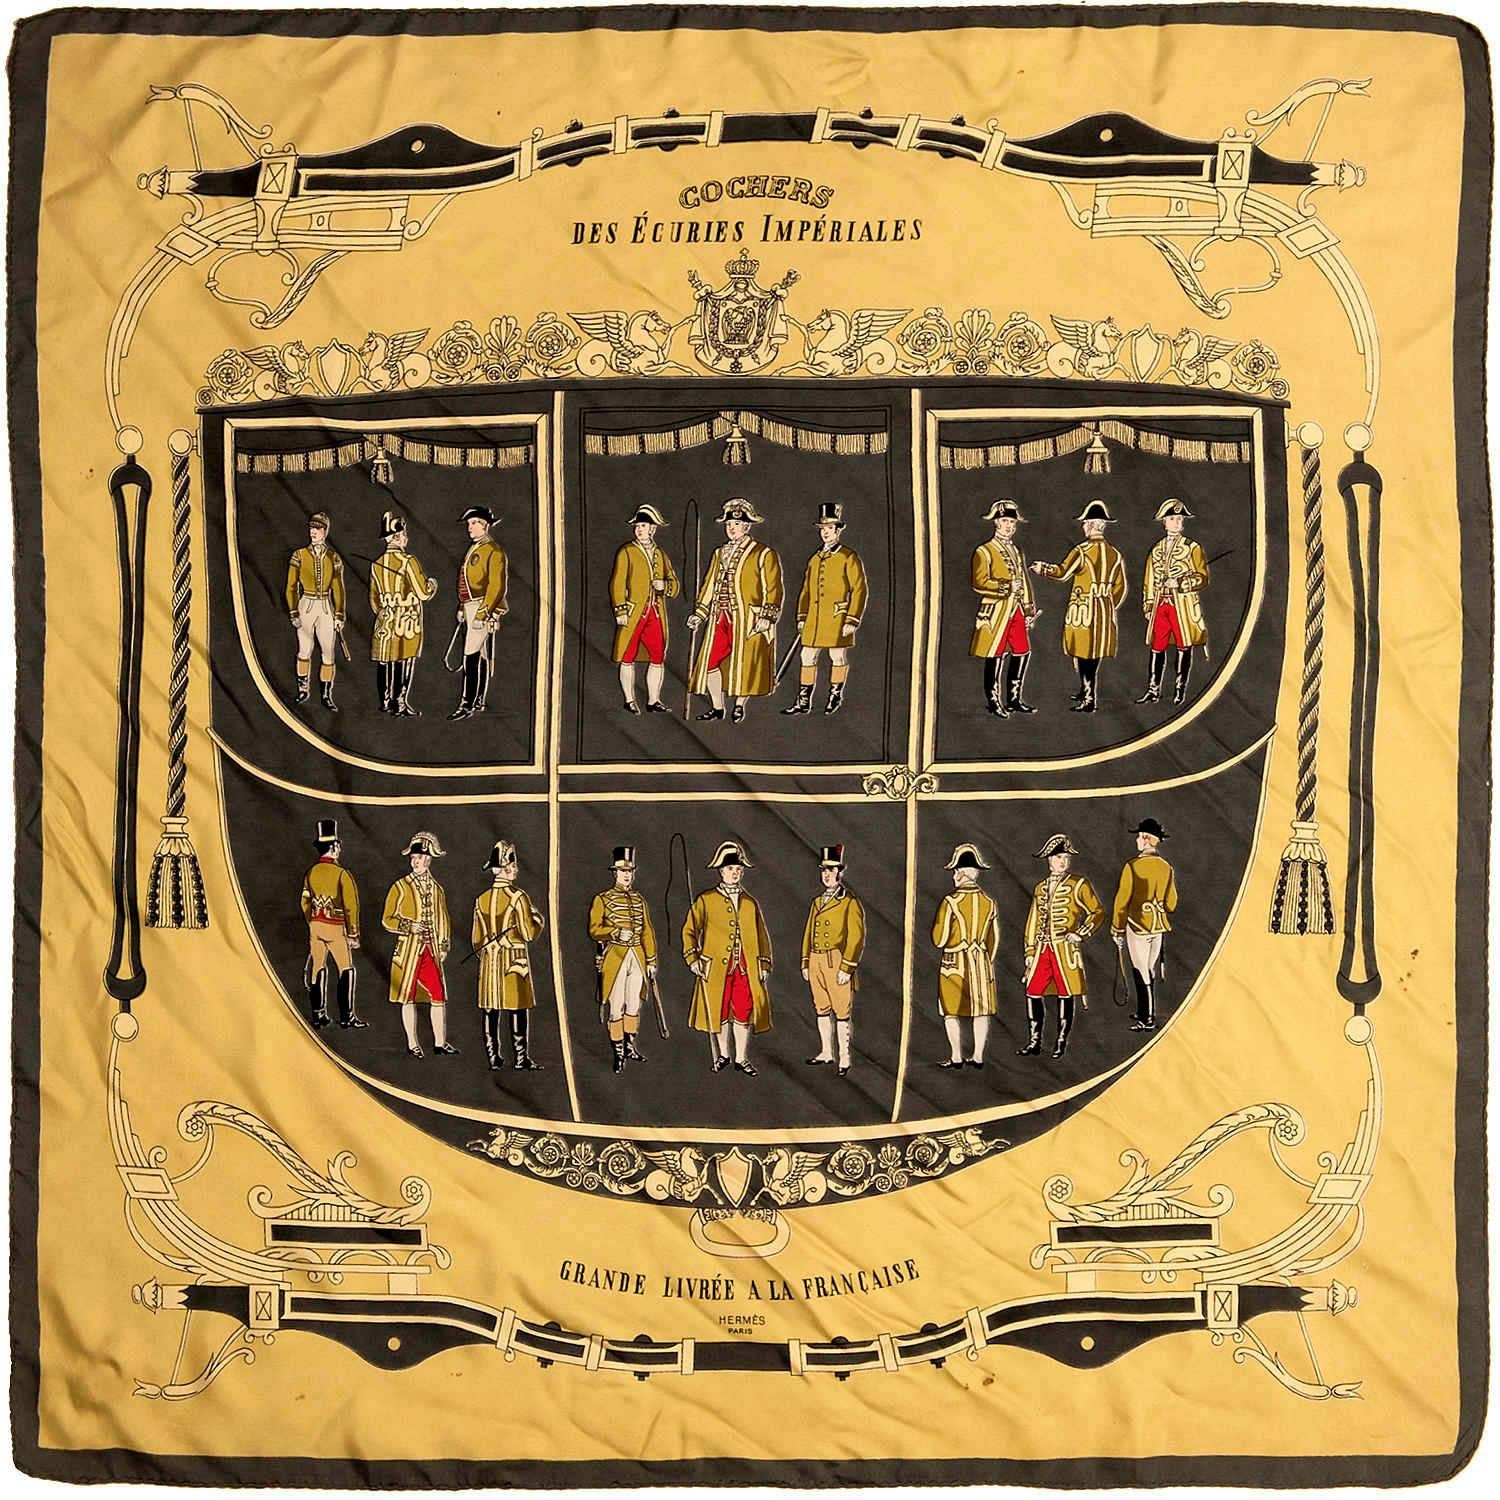 Over sixty years old, this extremely rare Hermes Silk Scarf is a real heritage piece. Designed by the legendary Hermes designer, Philippe Ledoux in 1954, the sumptuous colour way of a black border with a black gold ground complement the Regal